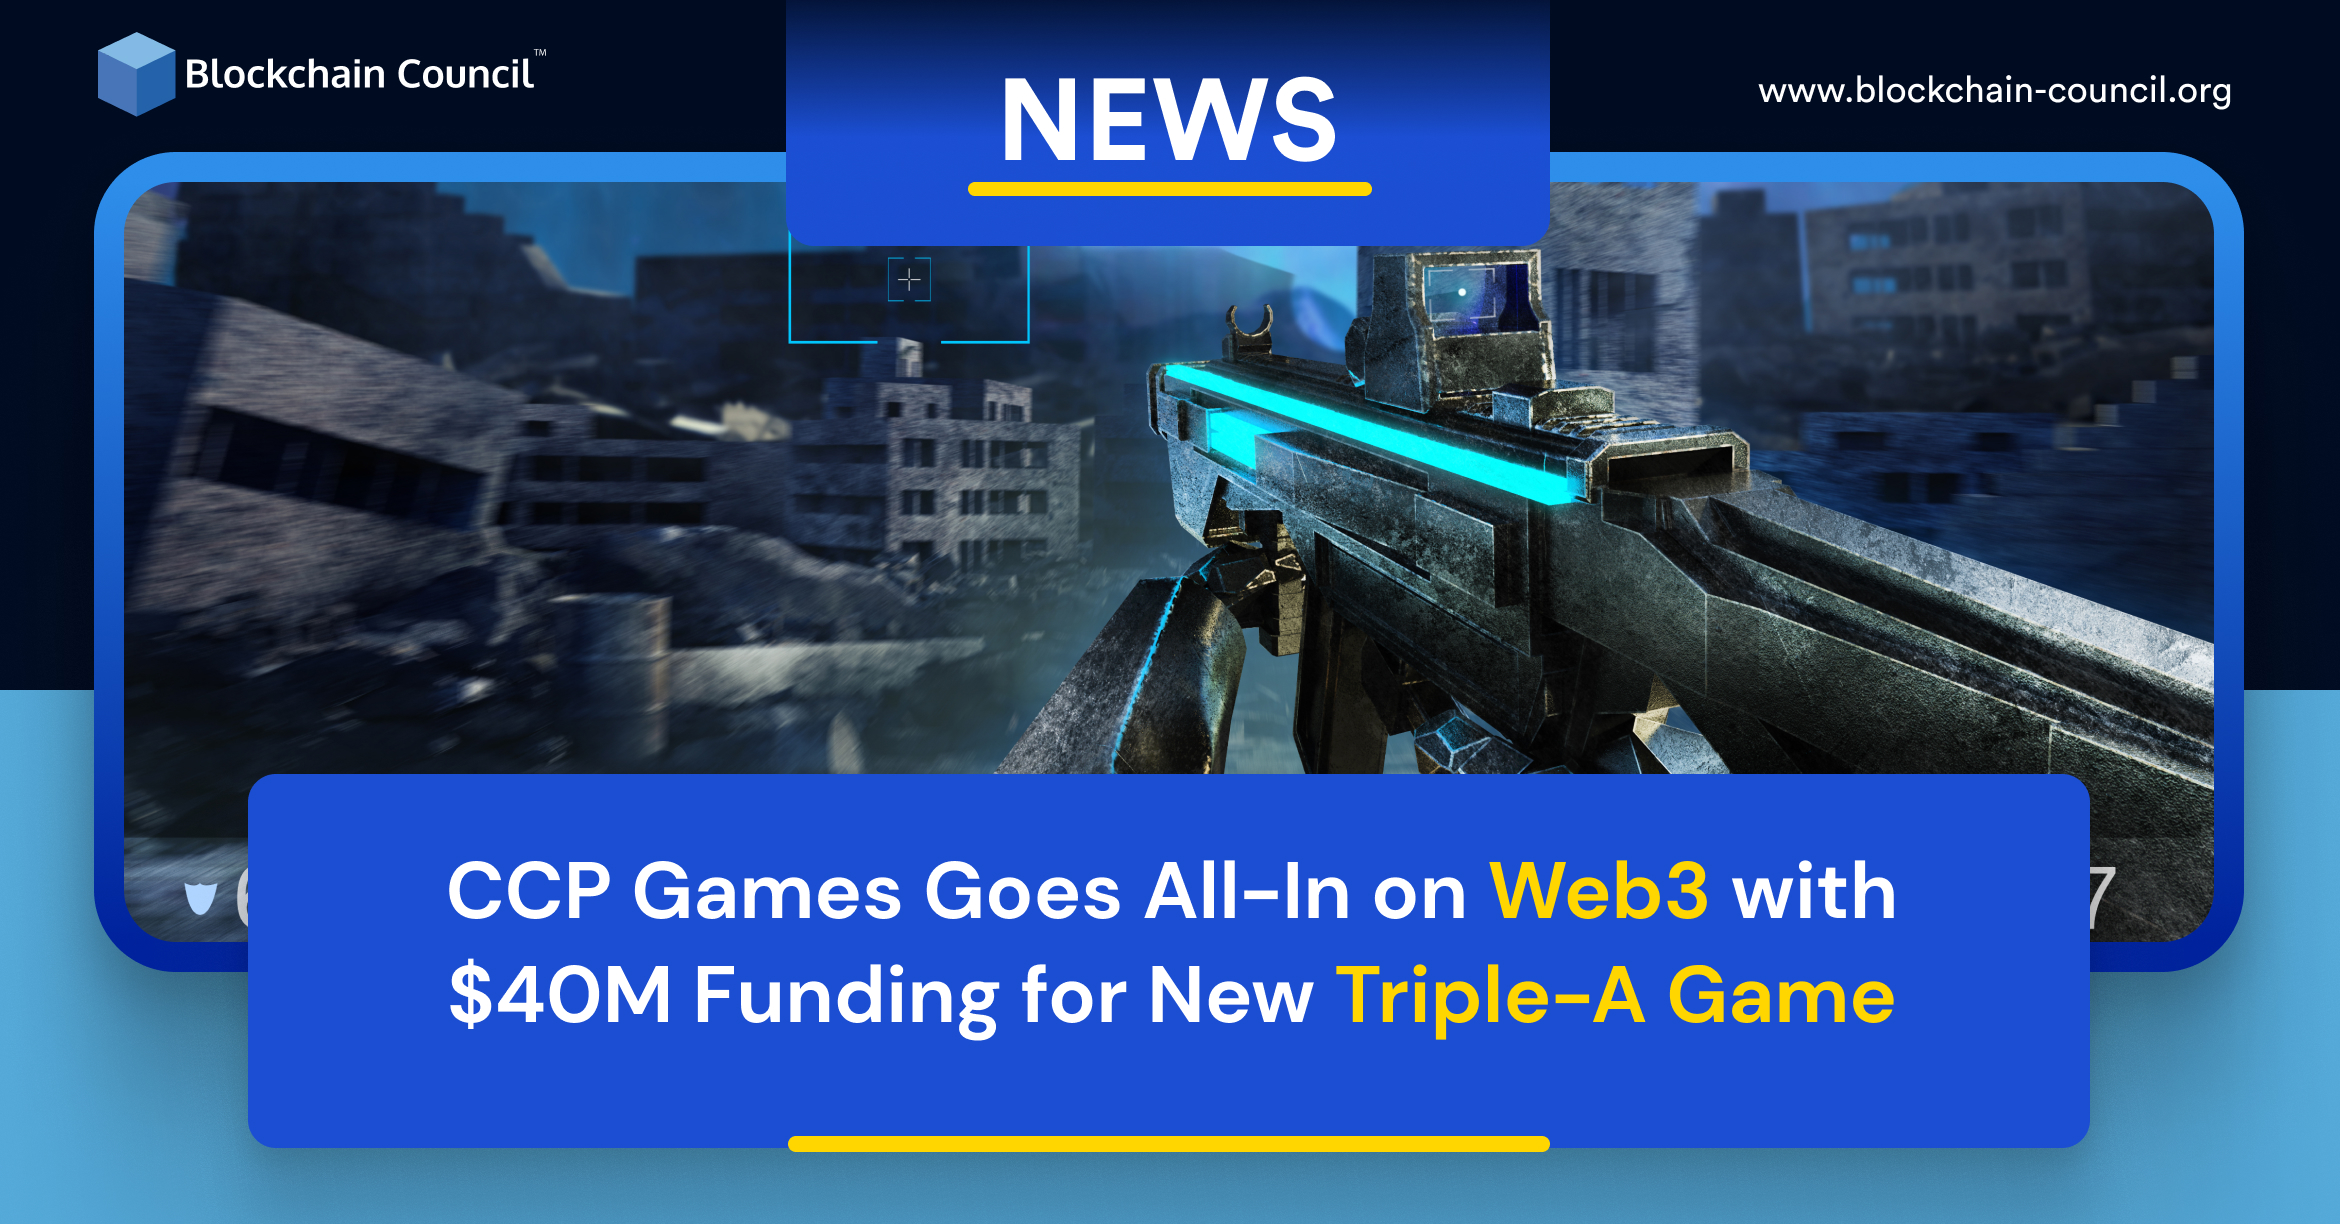 CCP Games Goes All-In on Web3 with $40M Funding for New Triple-A Game